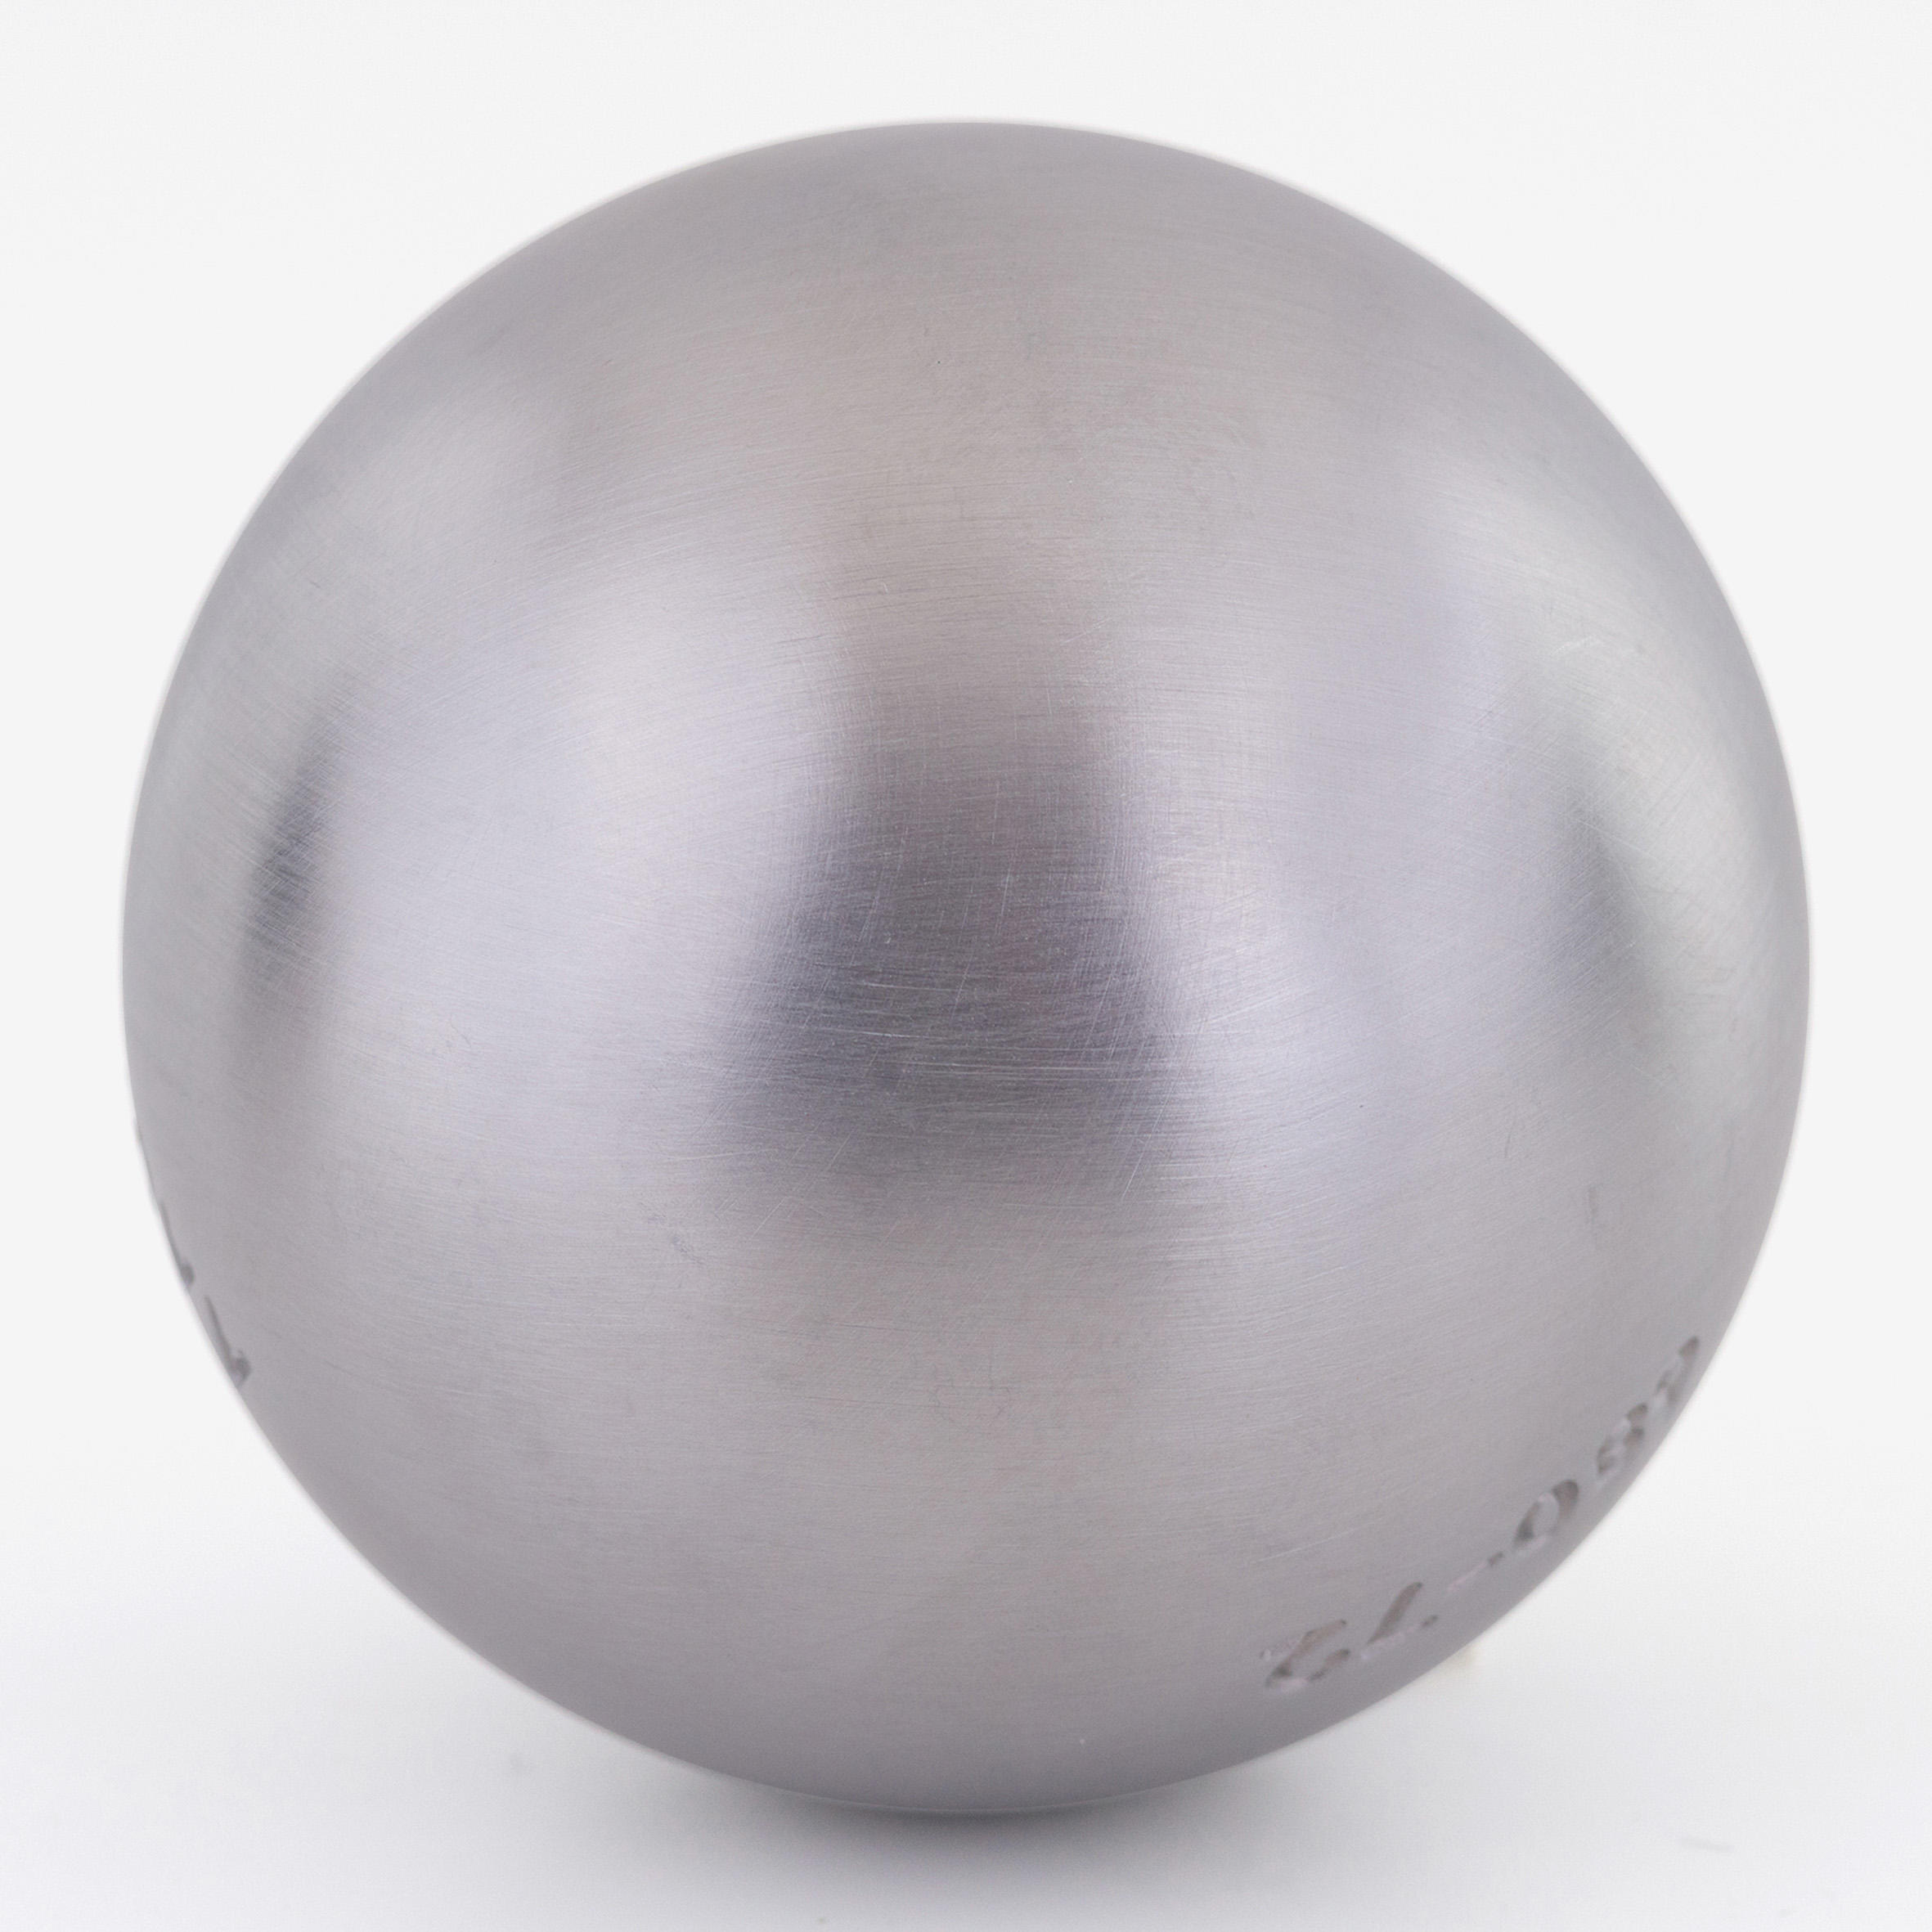 3 Semi-Soft Stainless Steel Competition Petanque Boules 13/13